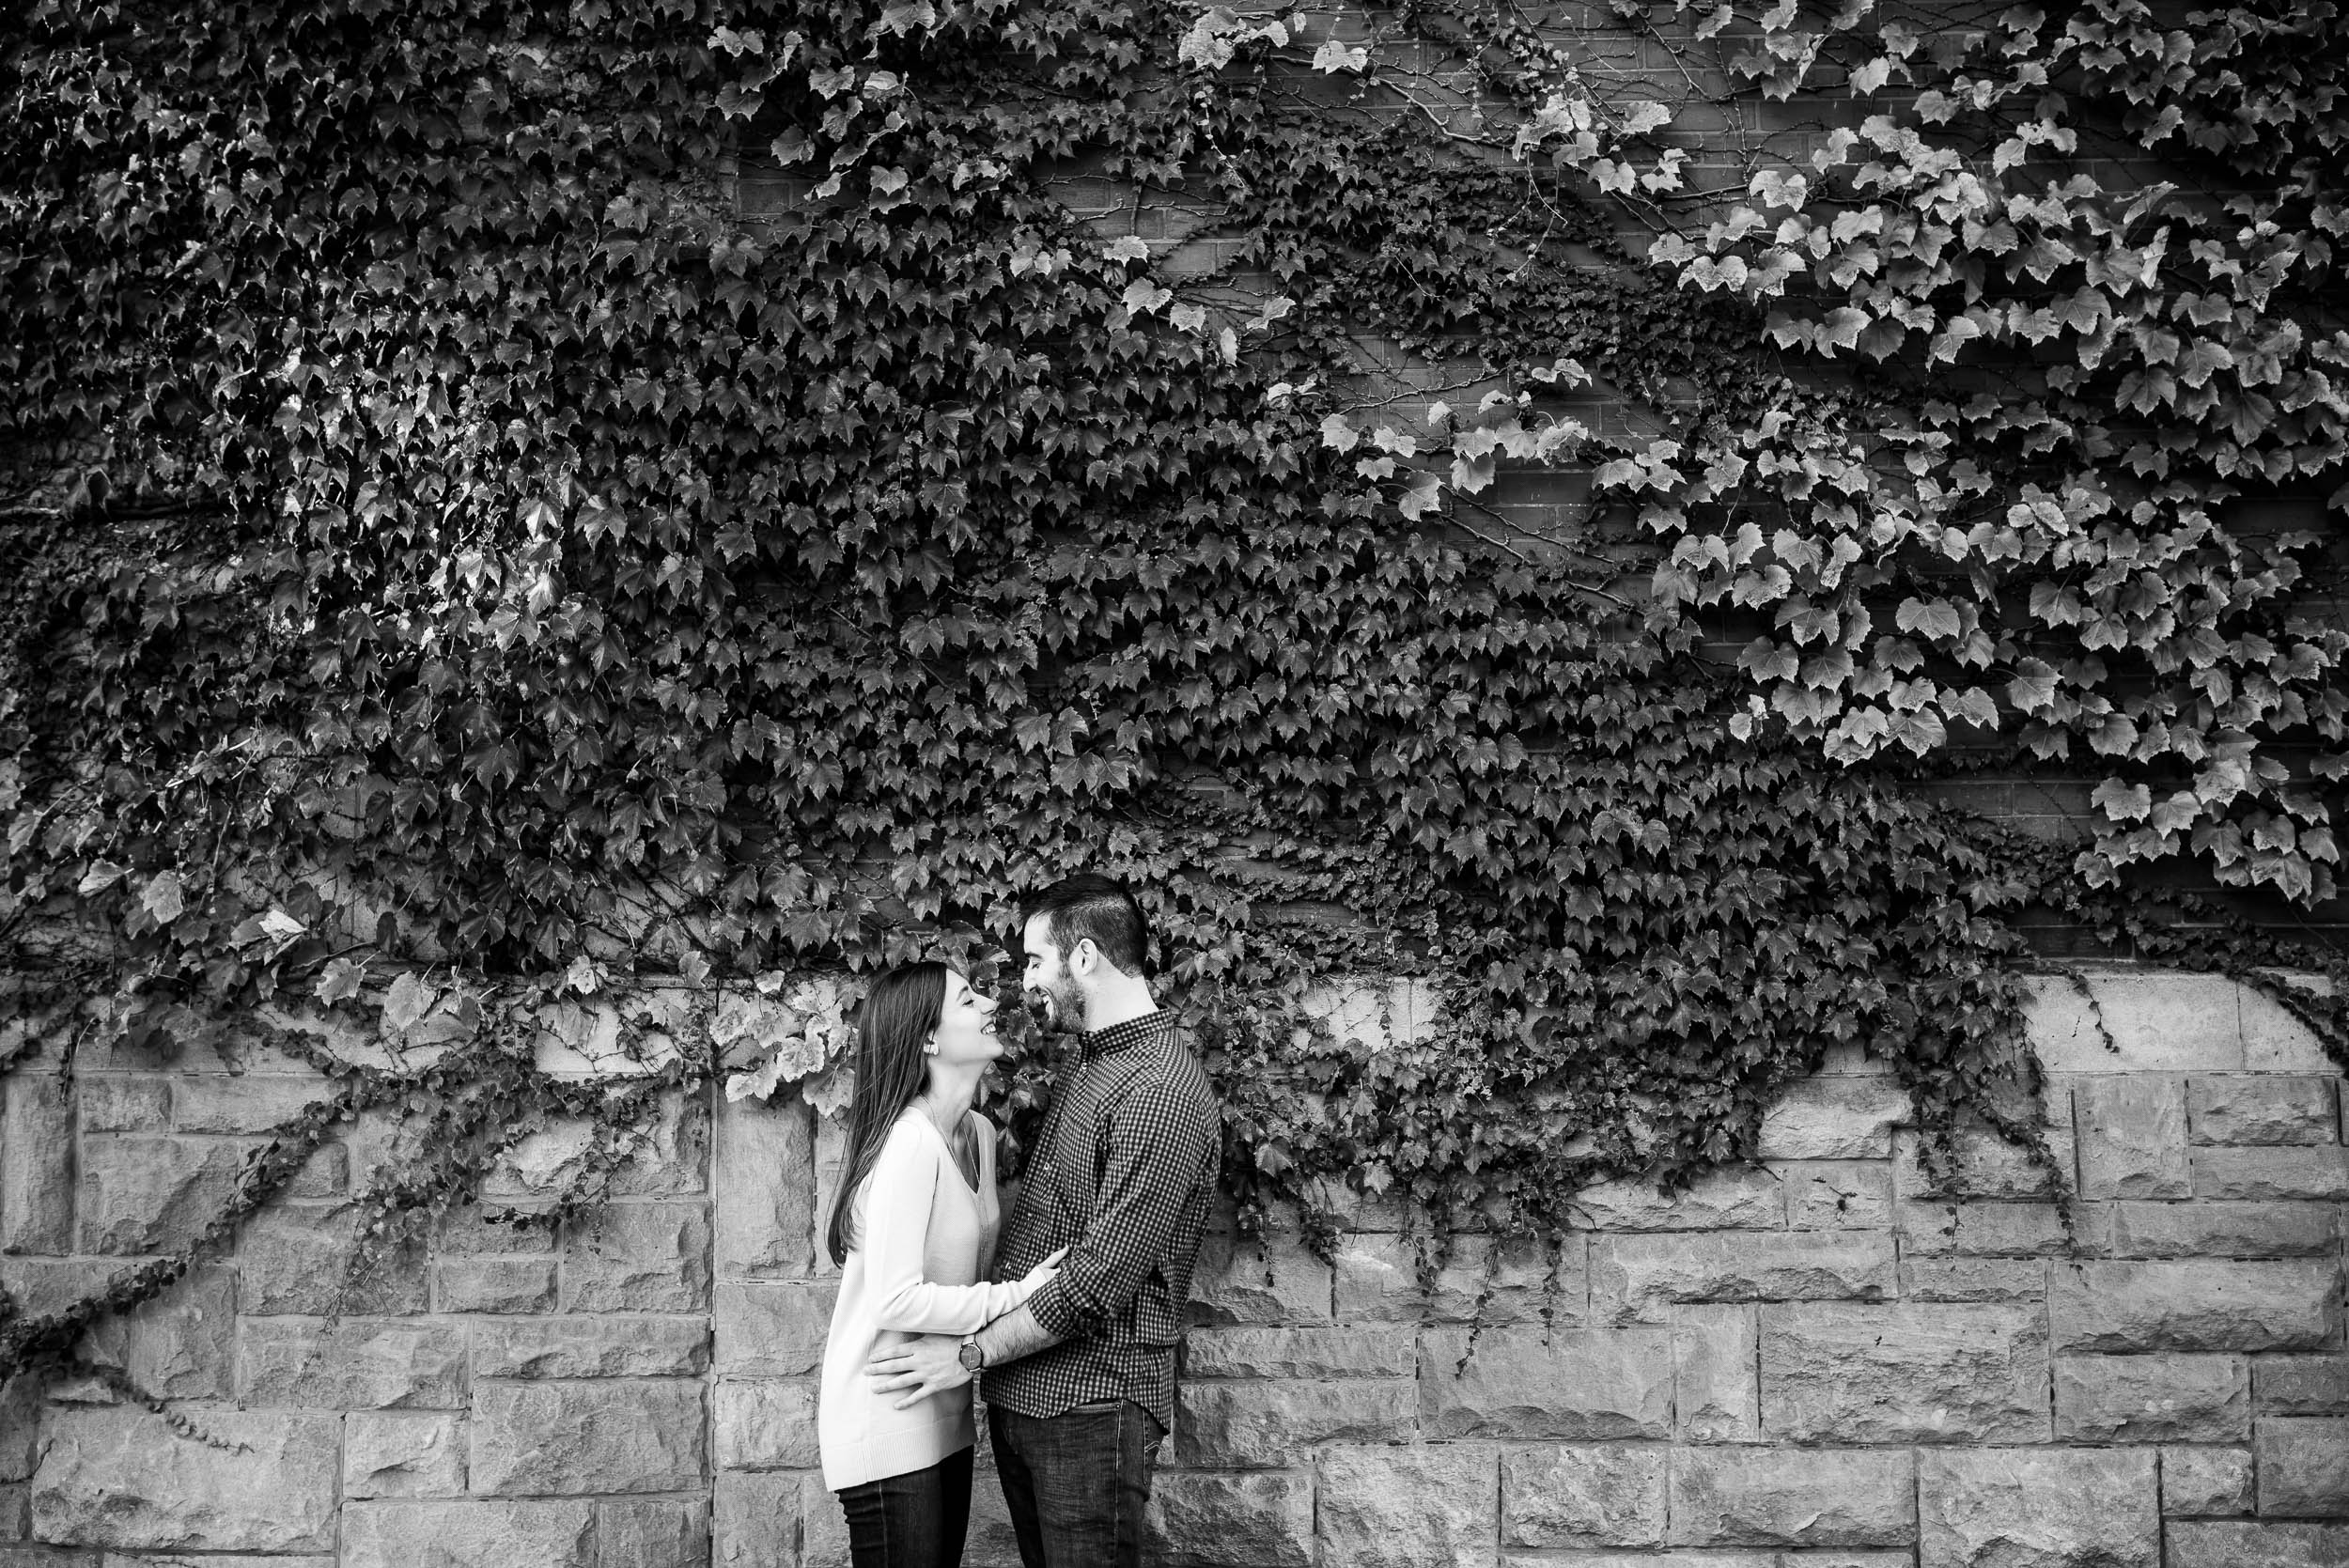 Copy of Lincoln Park Chicago engagement session captured by J. Brown Photography. See more engagement photo ideas at jbrownphotography.com!